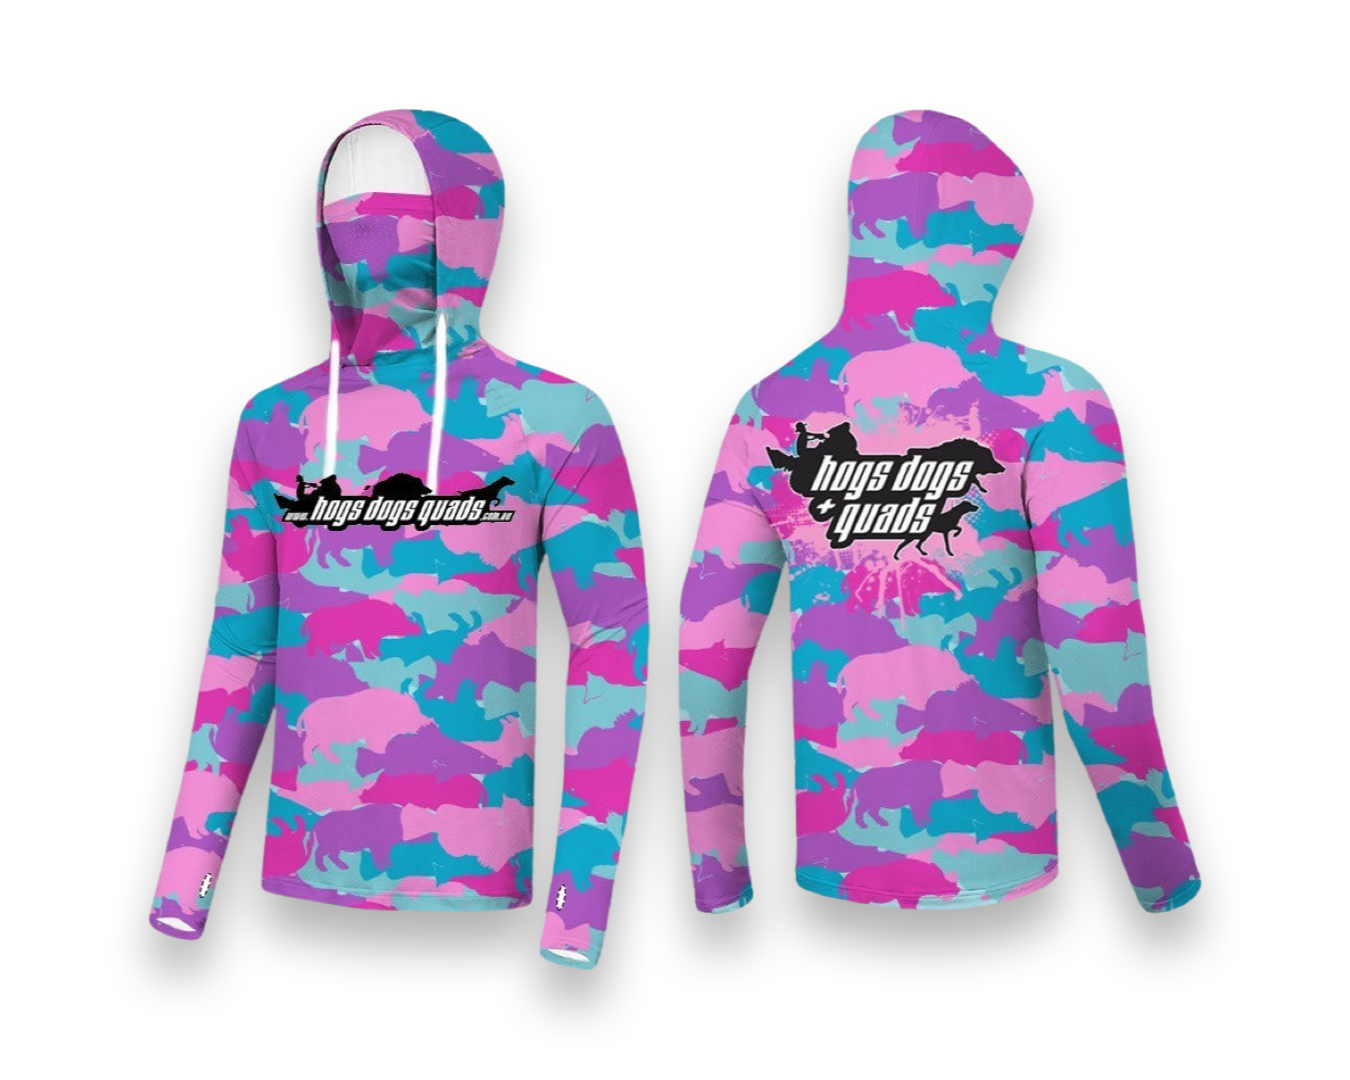 Pink & Teal Camo Hoodie & Buff in one! - Hogs Dogs Quads Shop